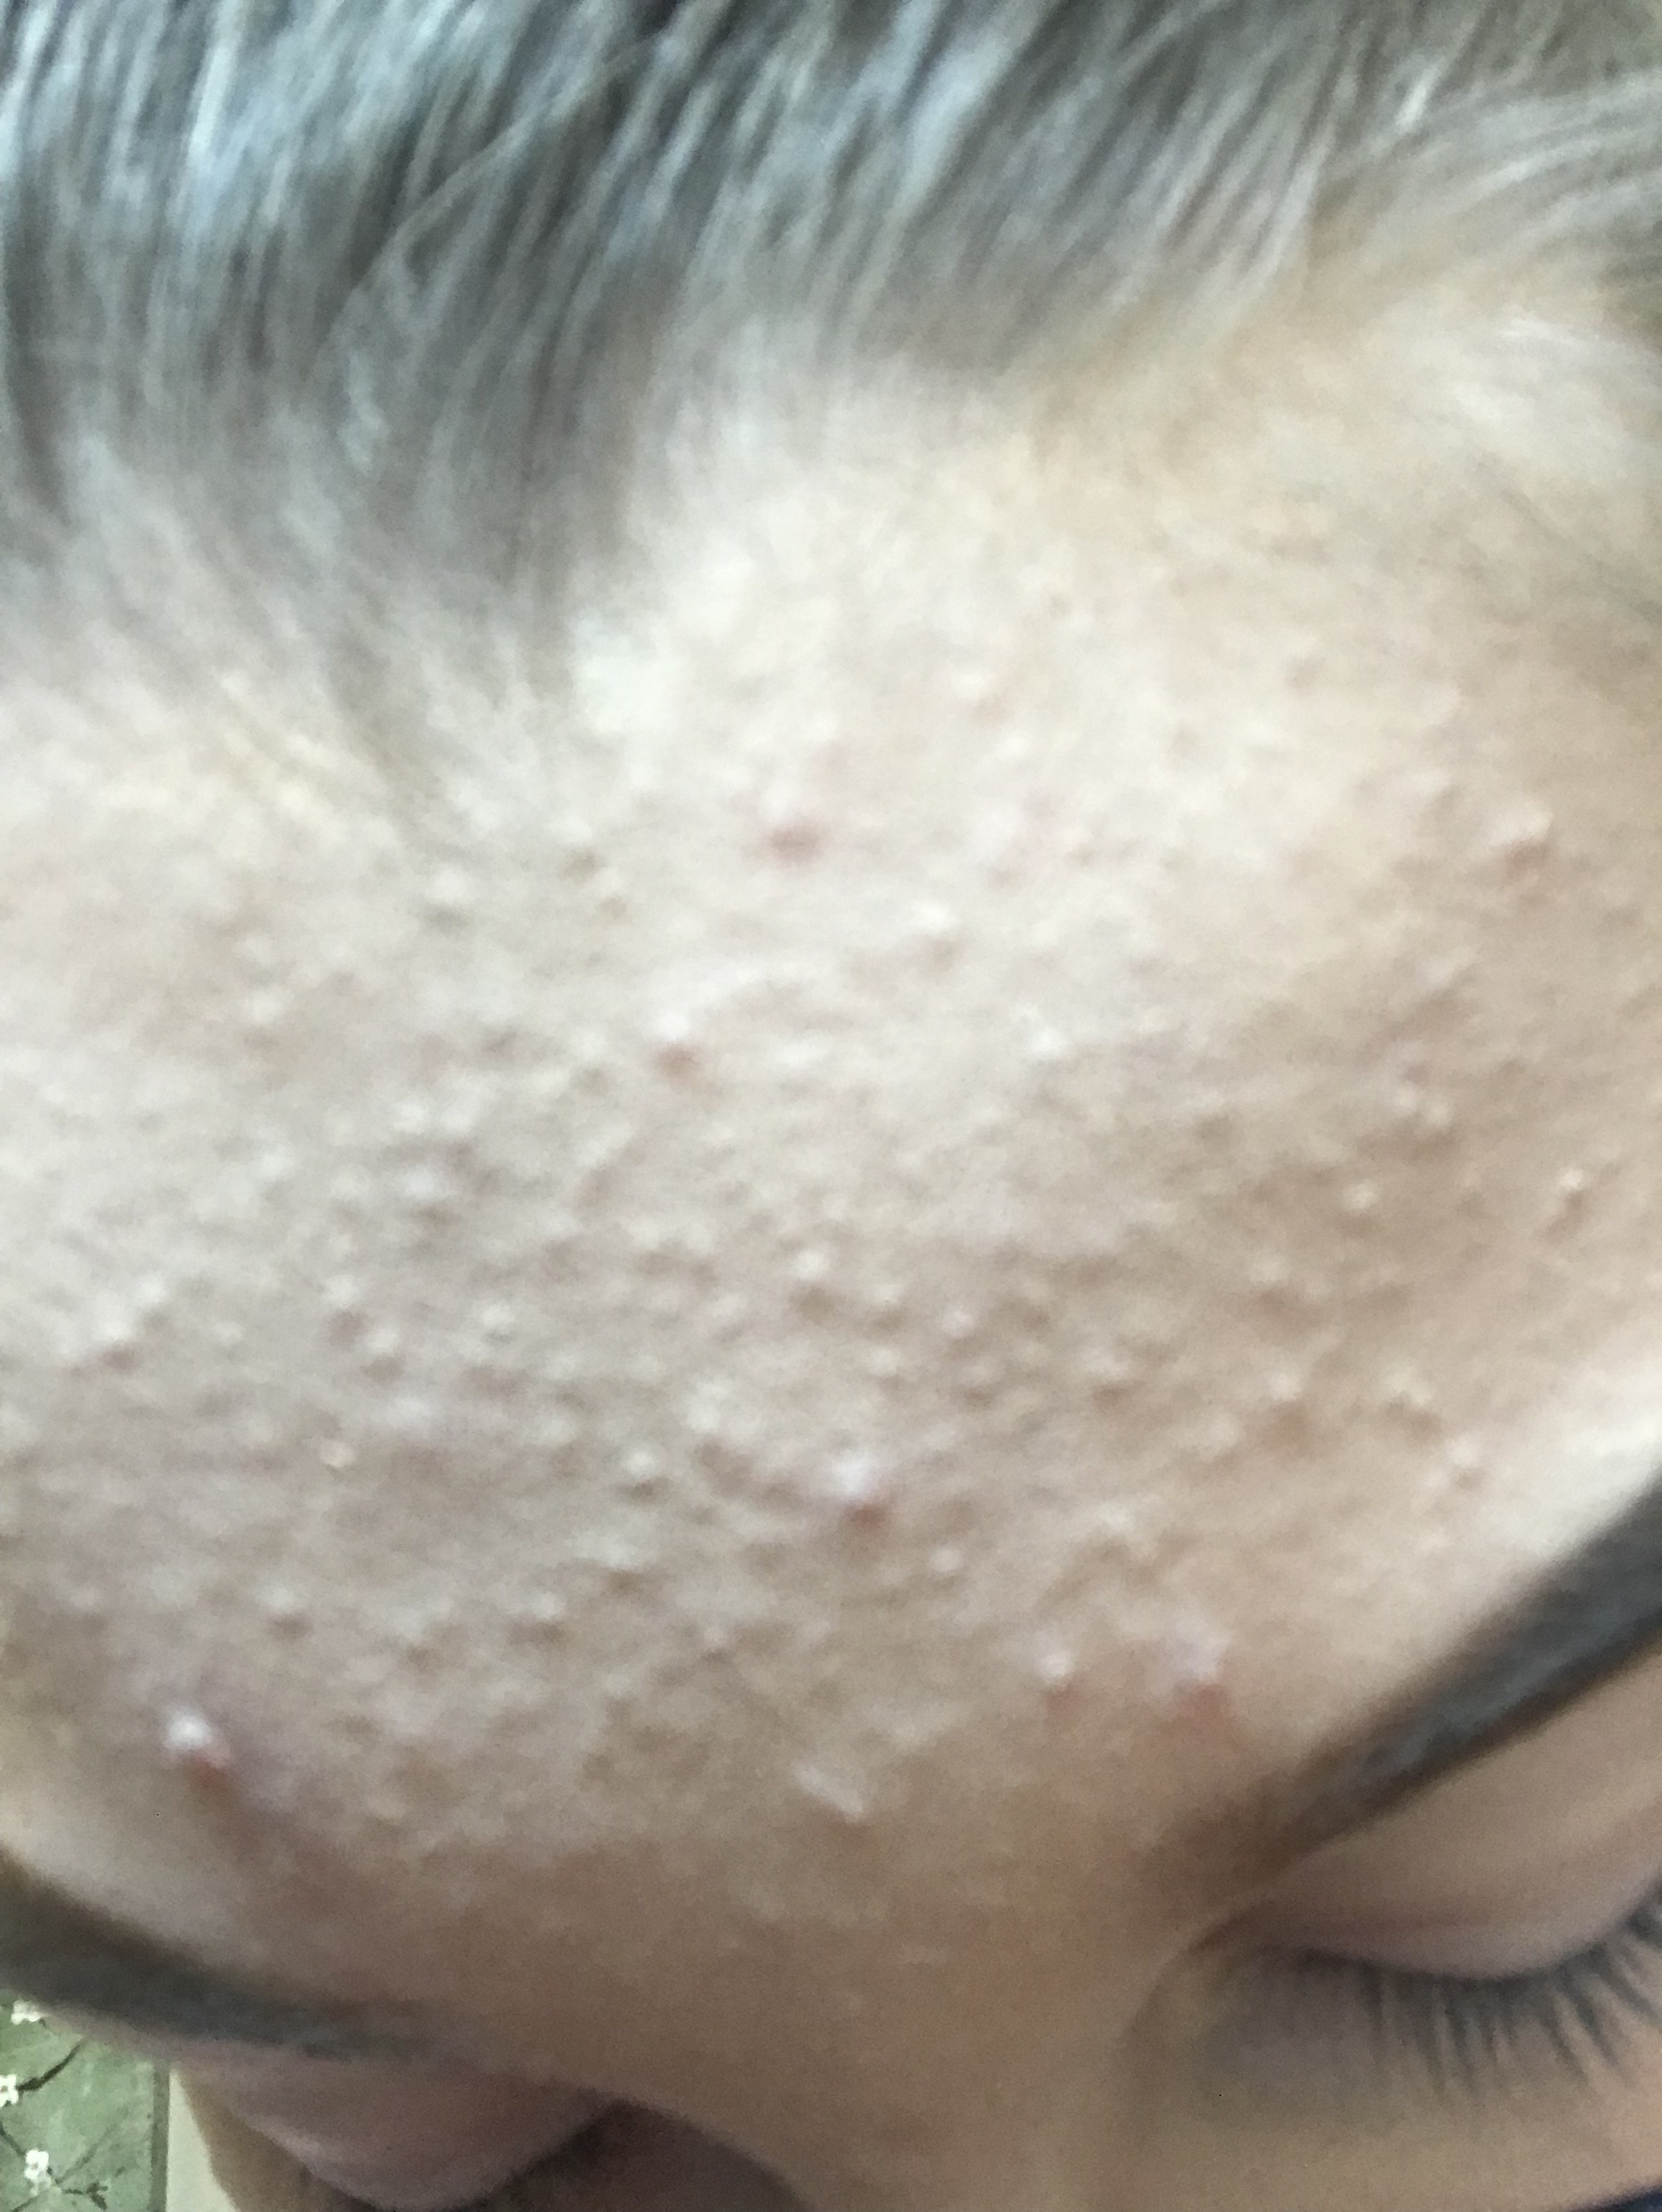 Tiny Bumps All Over Forehead General Acne Discussion Forum